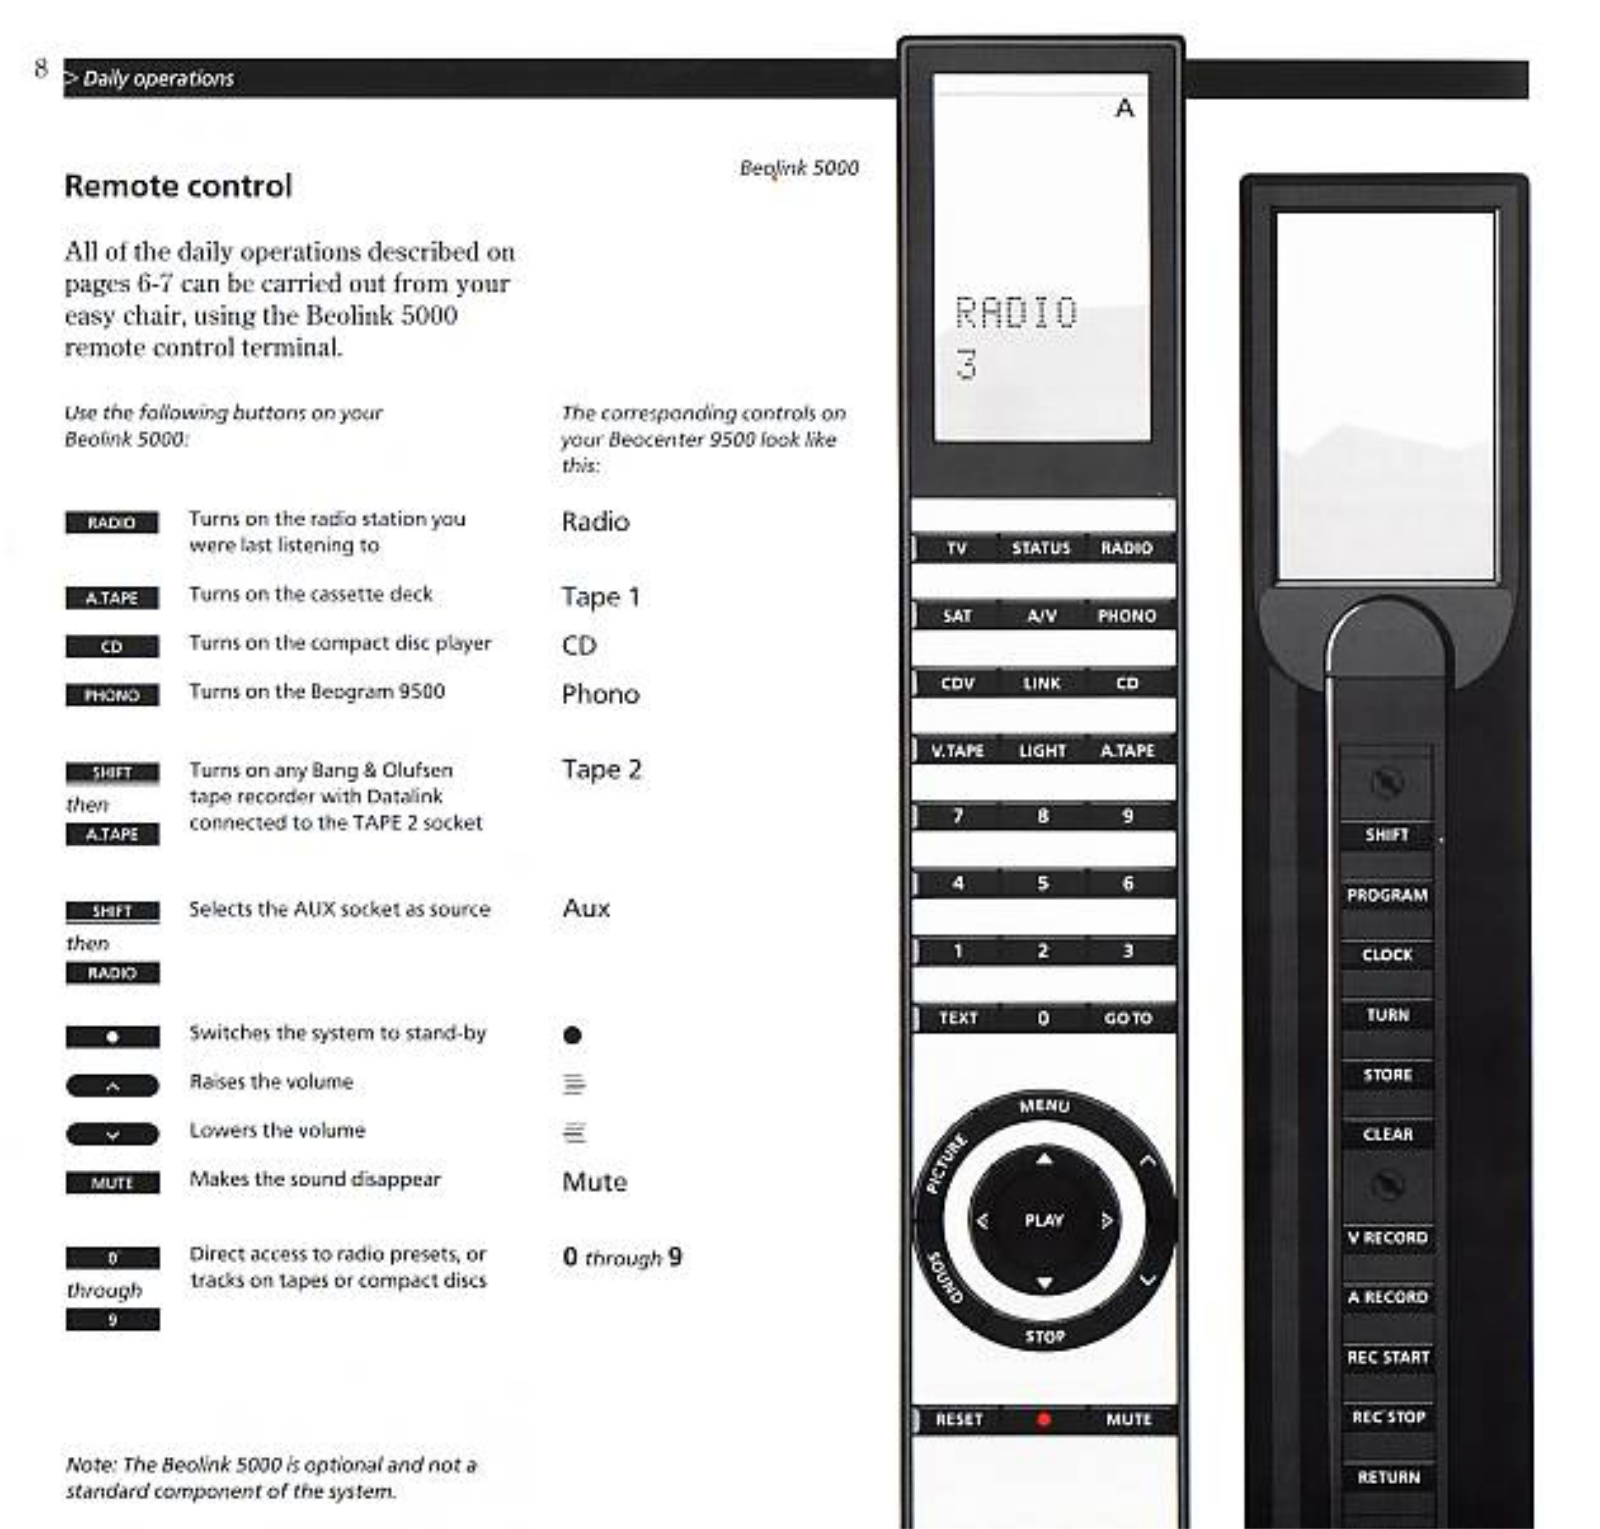 Bang Olufsen Beolink 5000 Owners Manual